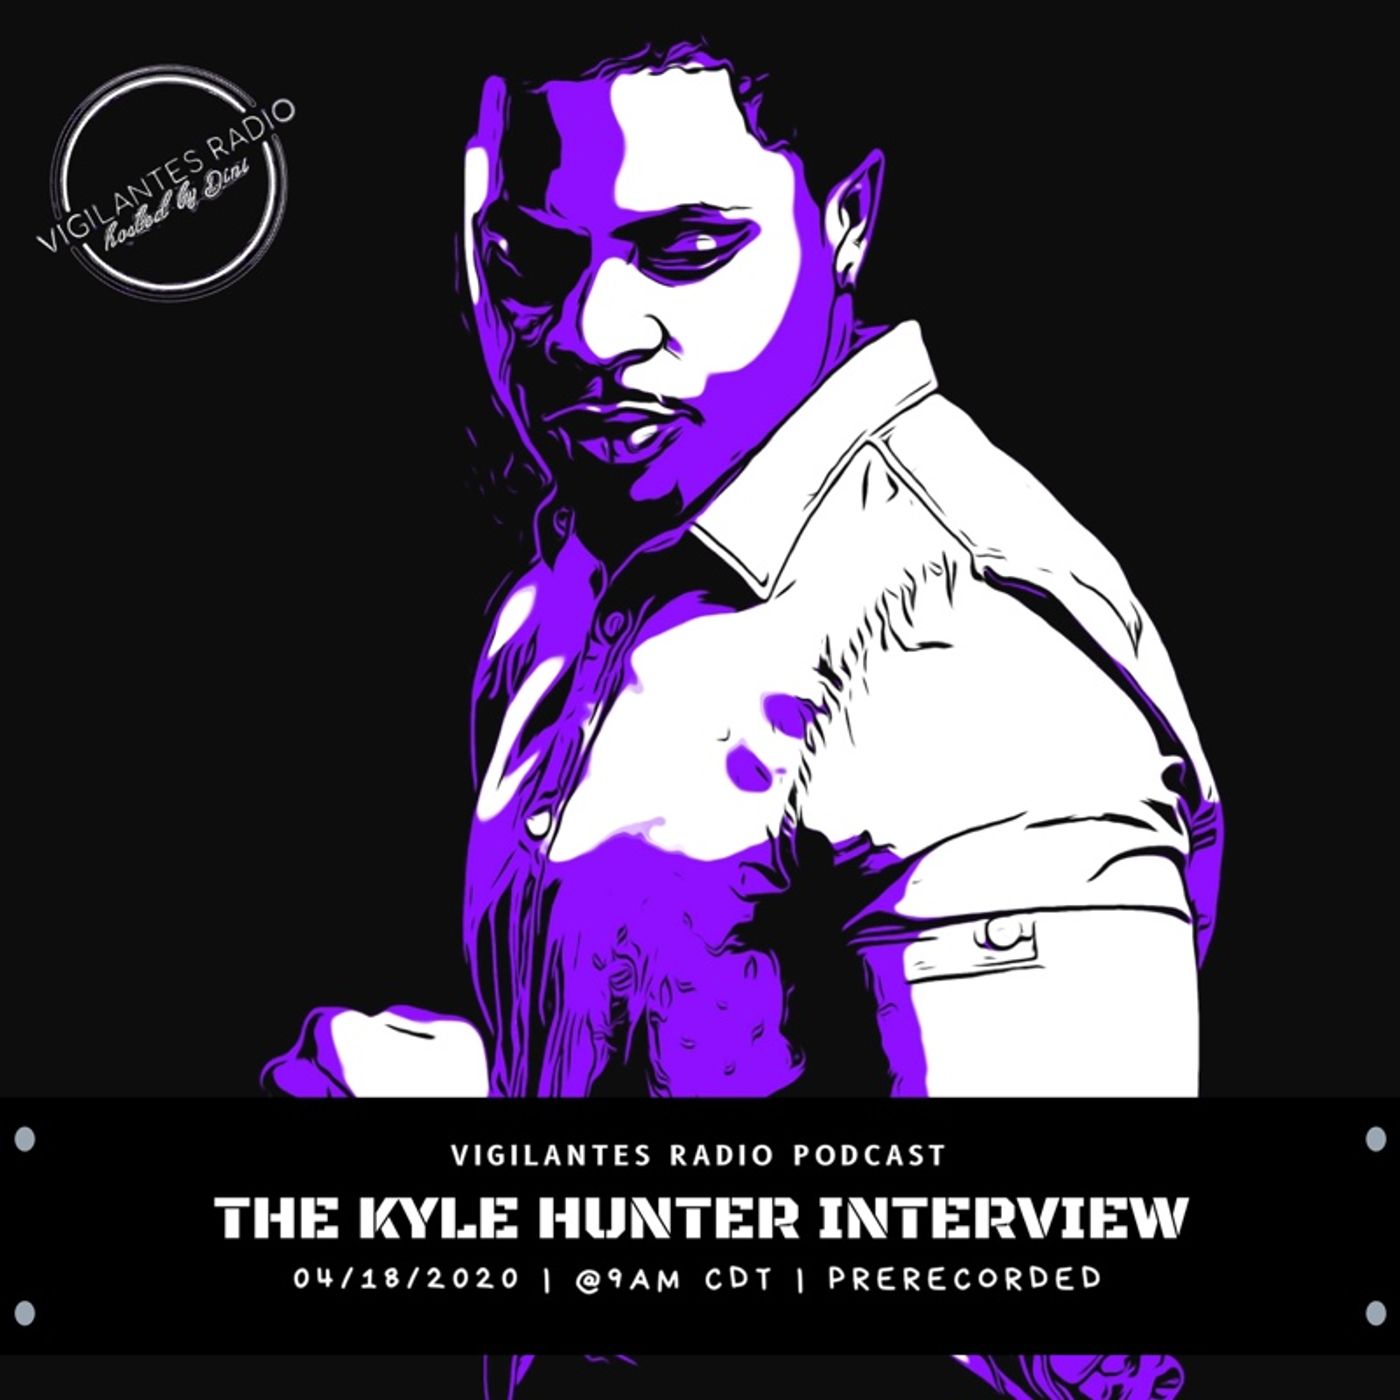 The Kyle Hunter Interview. Image